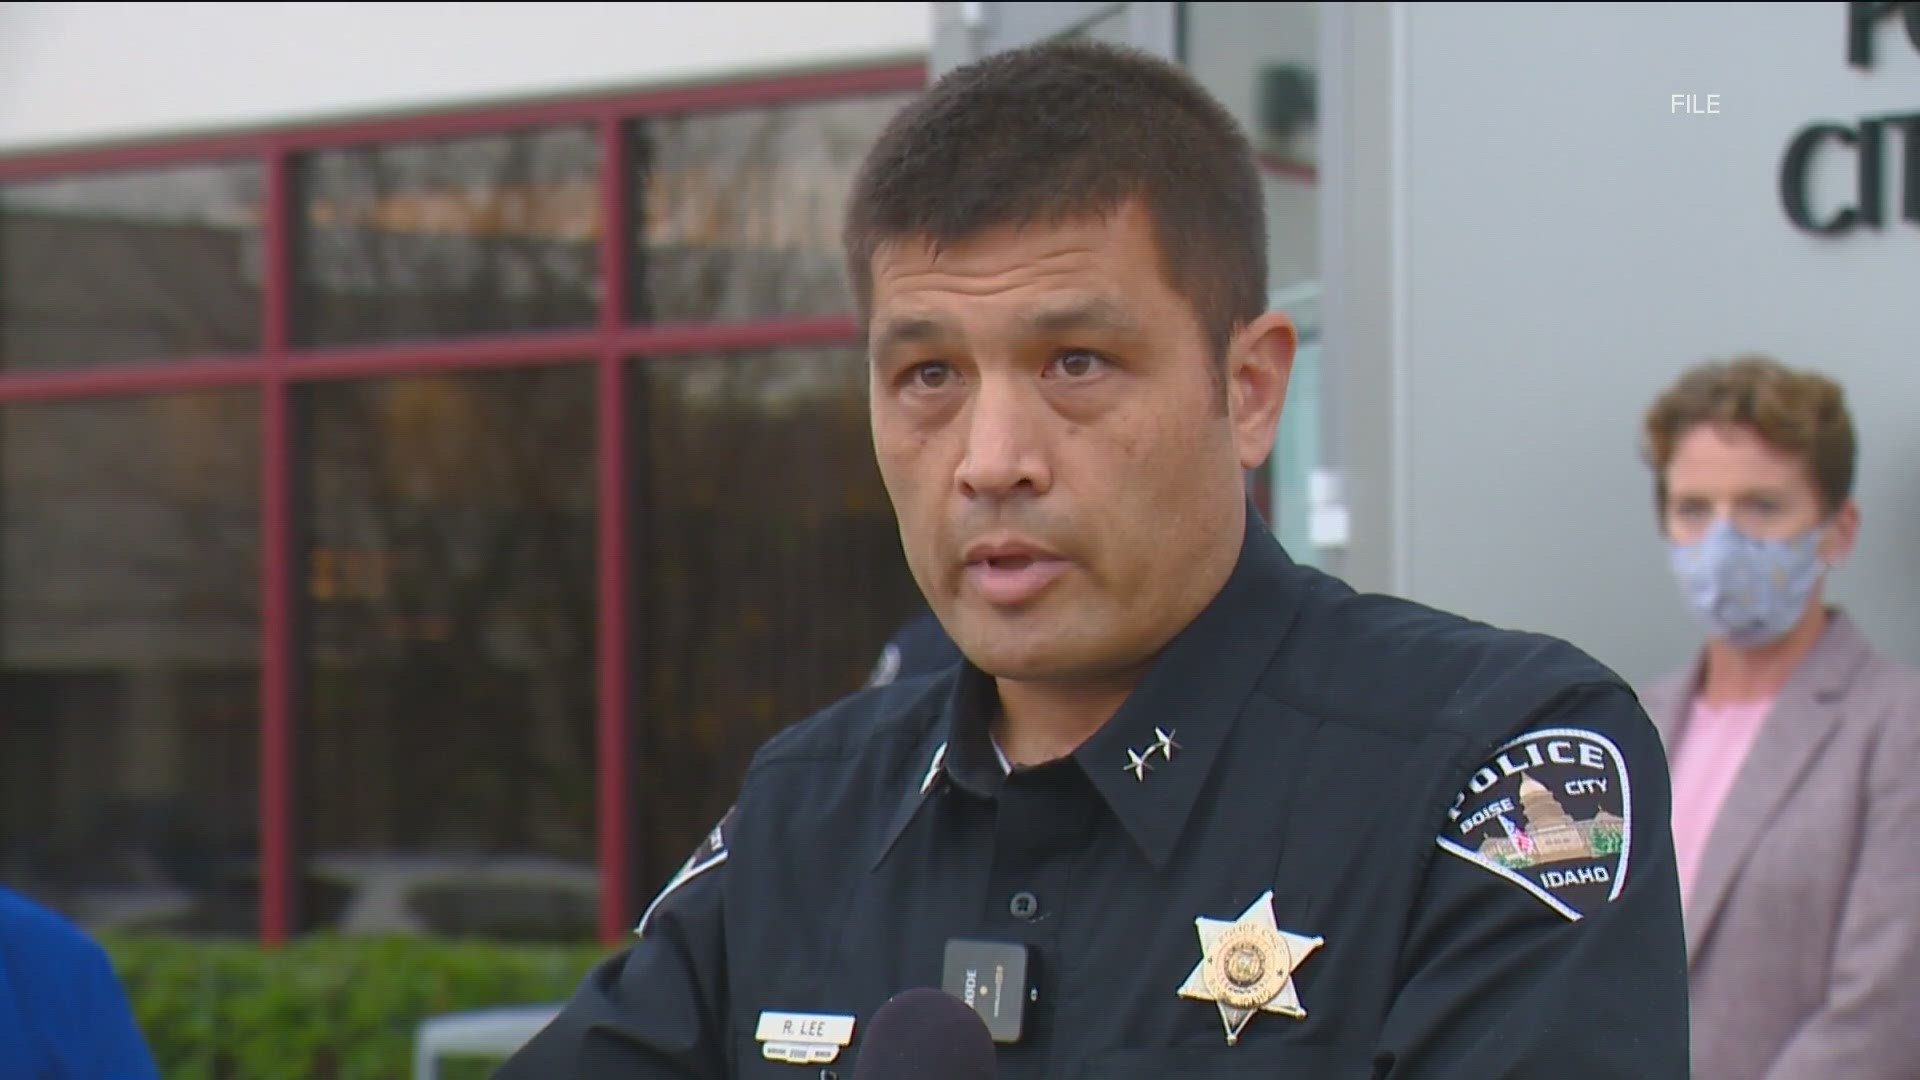 Lee, who was asked to resign at the request of Boise Mayor Lauren McLean in September 2022, "appears to be in line" to become Pittsburgh's new police chief.